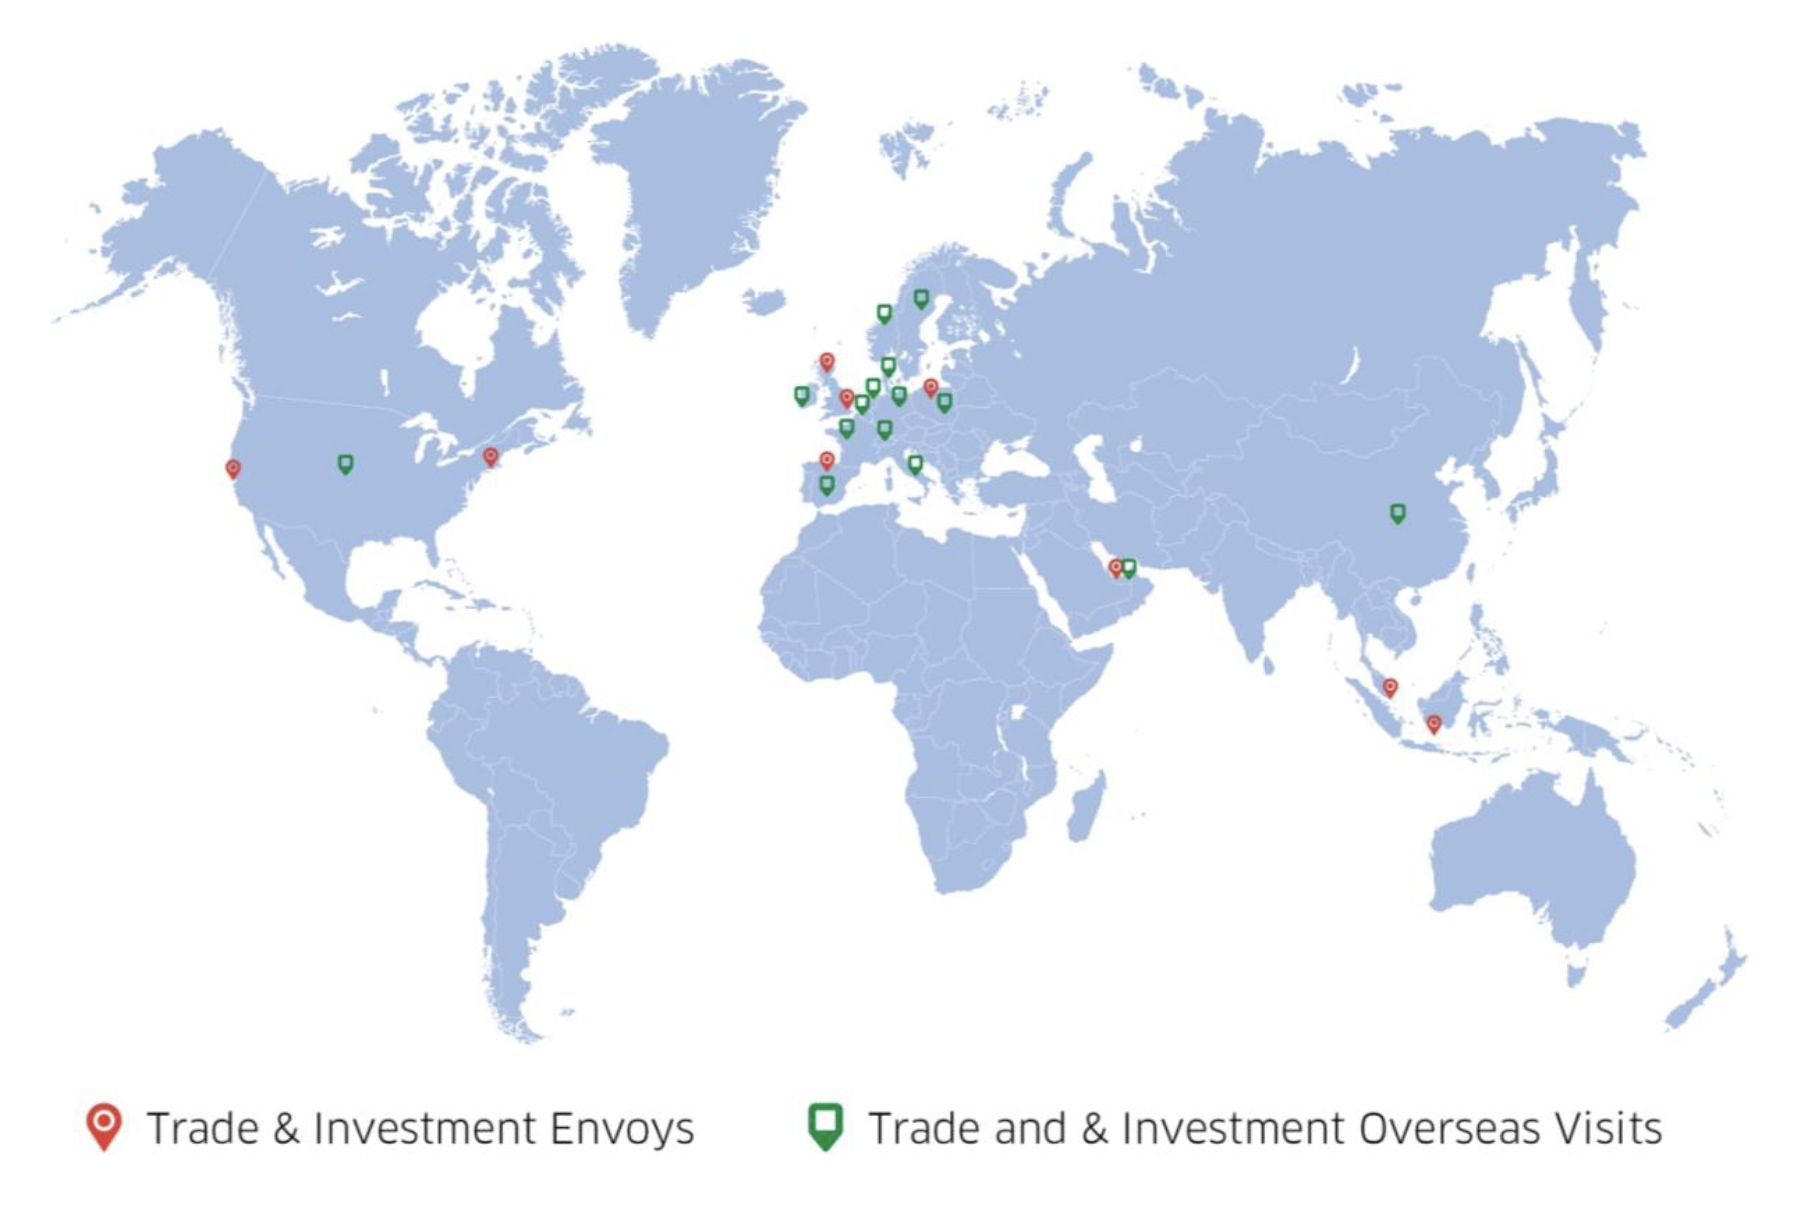 Figure 4 shows a map of our Trade and Investment Overseas visits, along with the regions where our Trade and Investment Envoys are based.